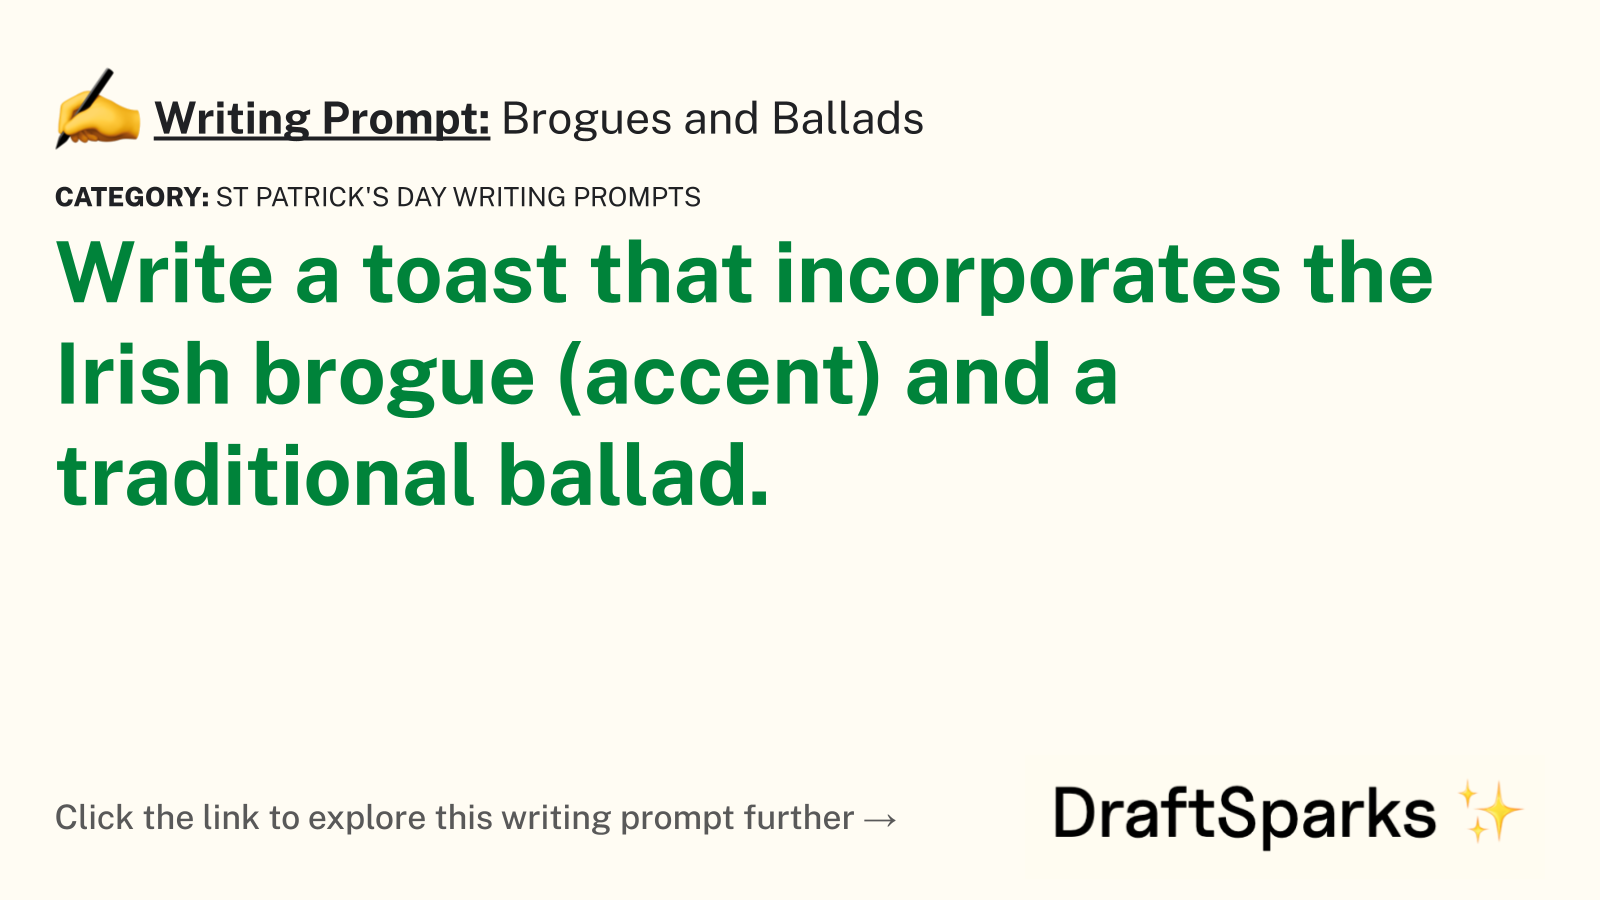 Brogues and Ballads